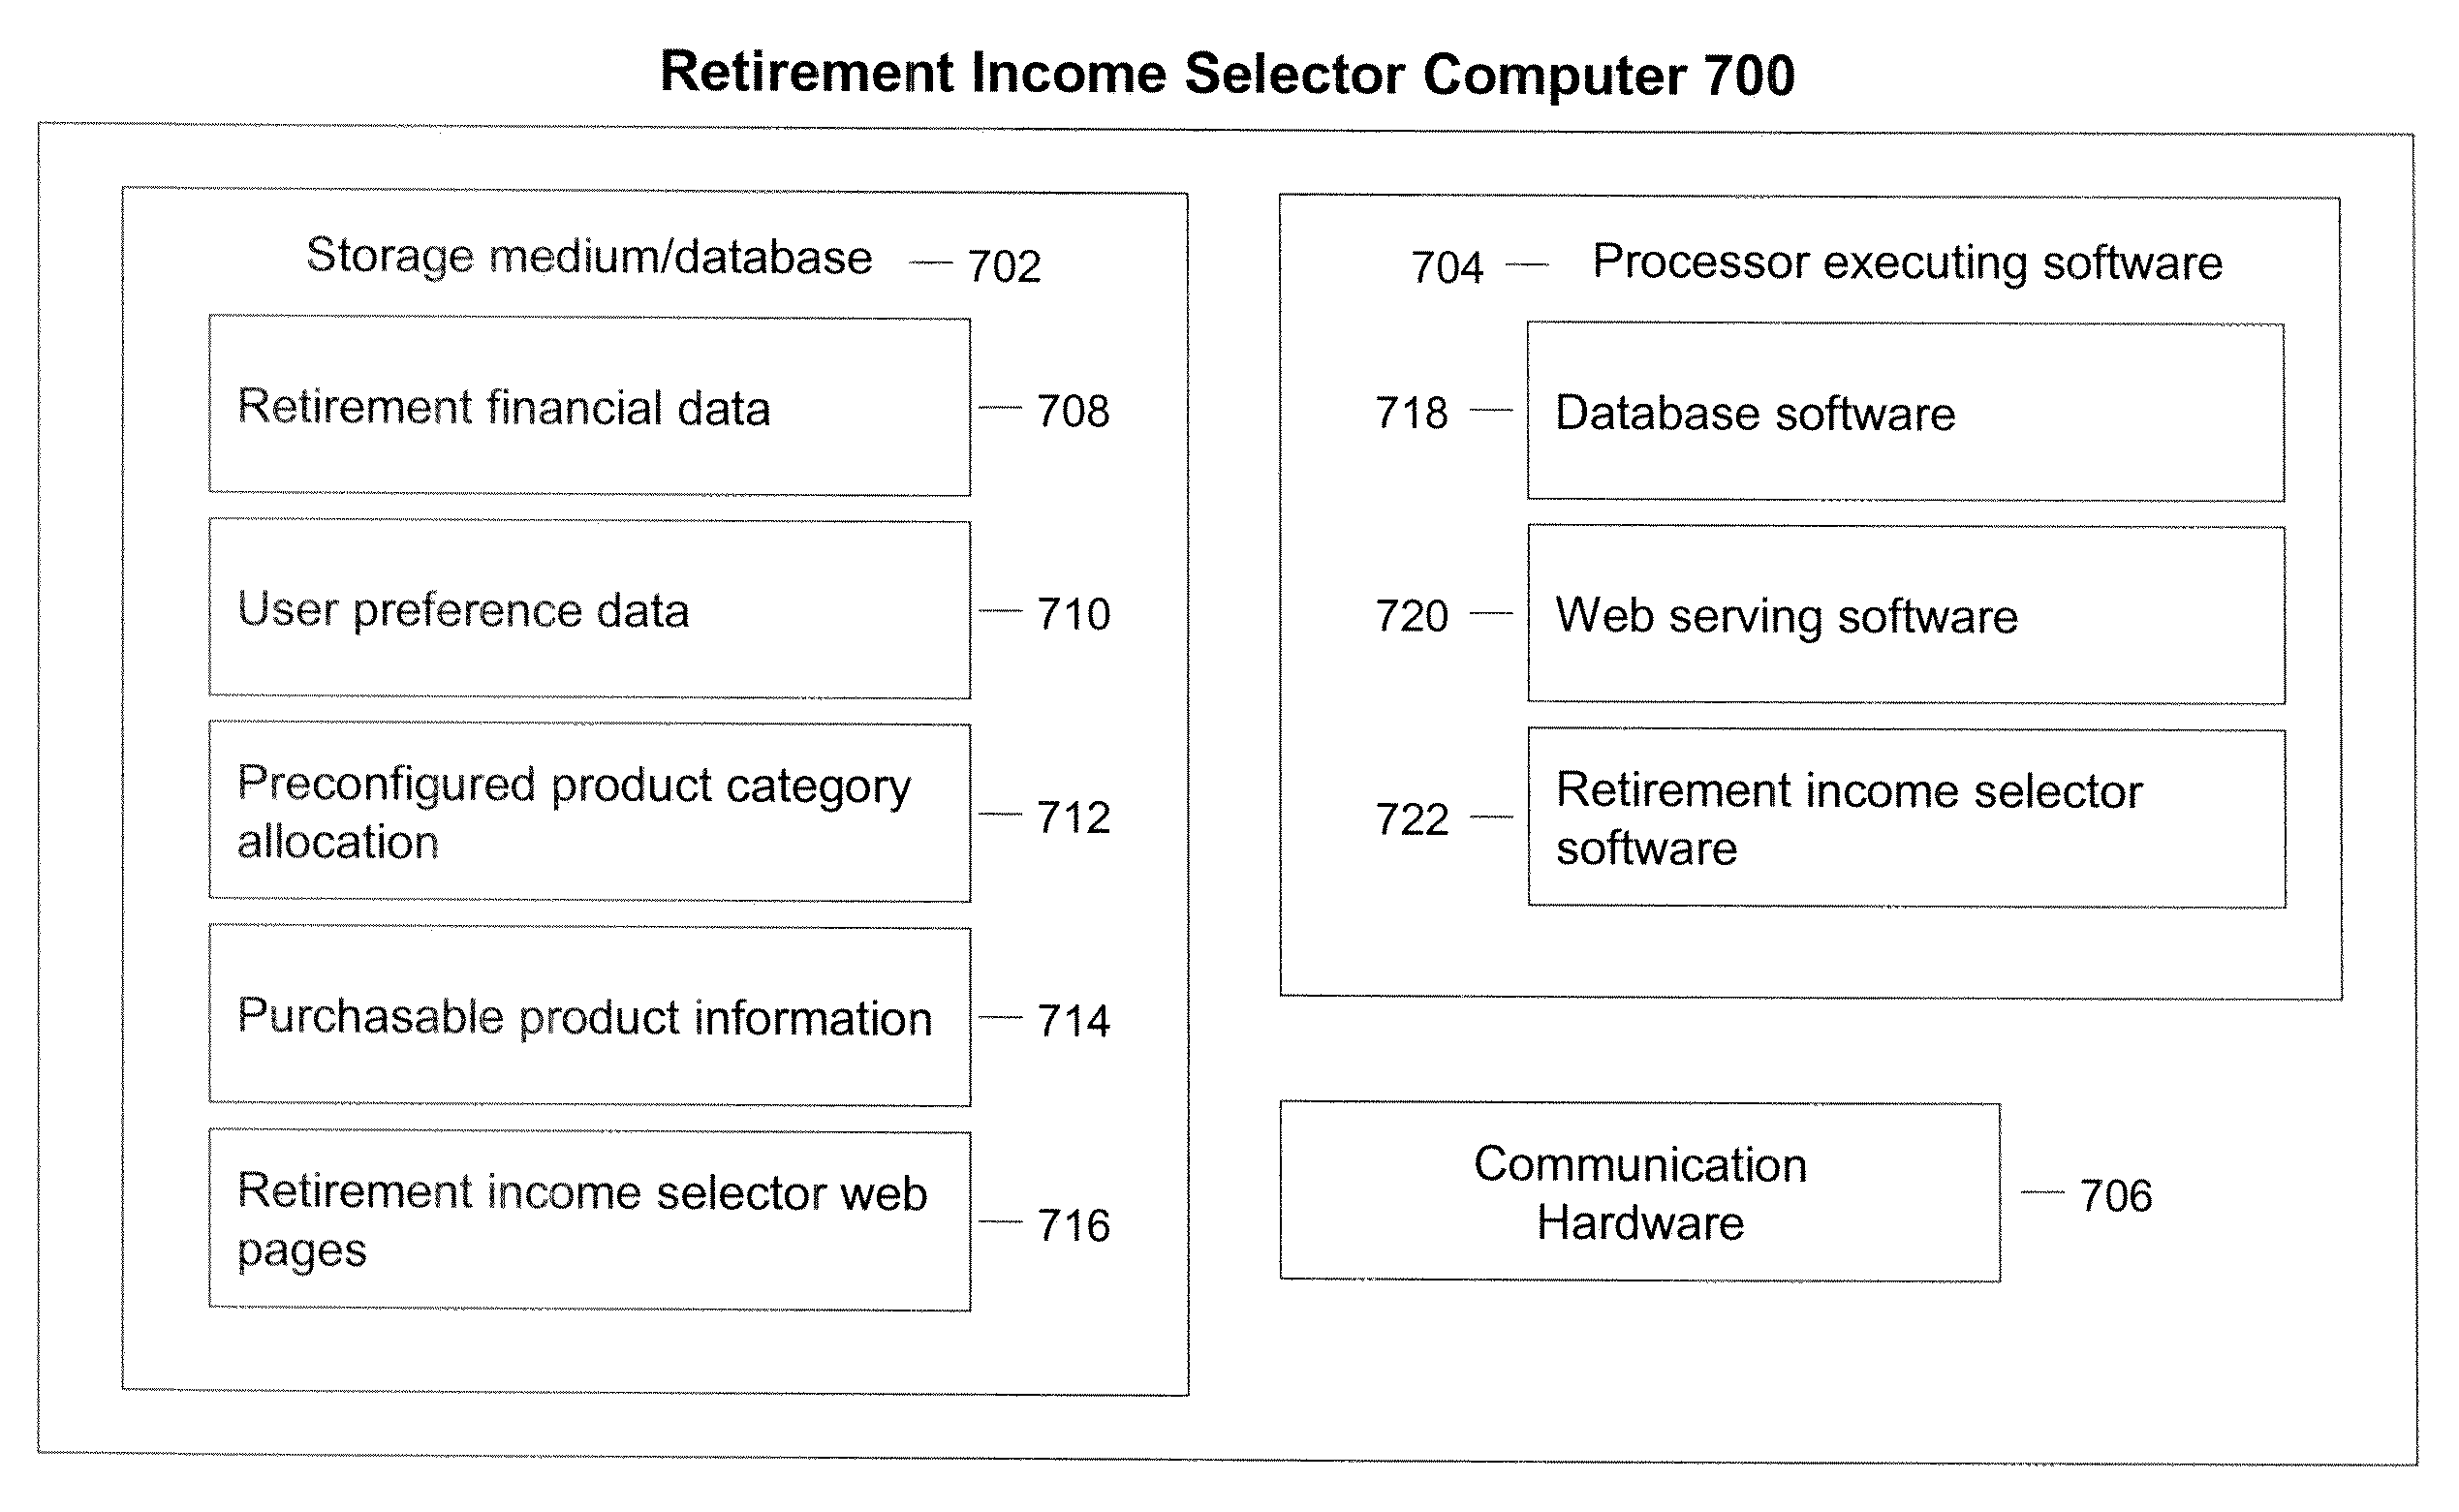 Retirement income selector systems and methods